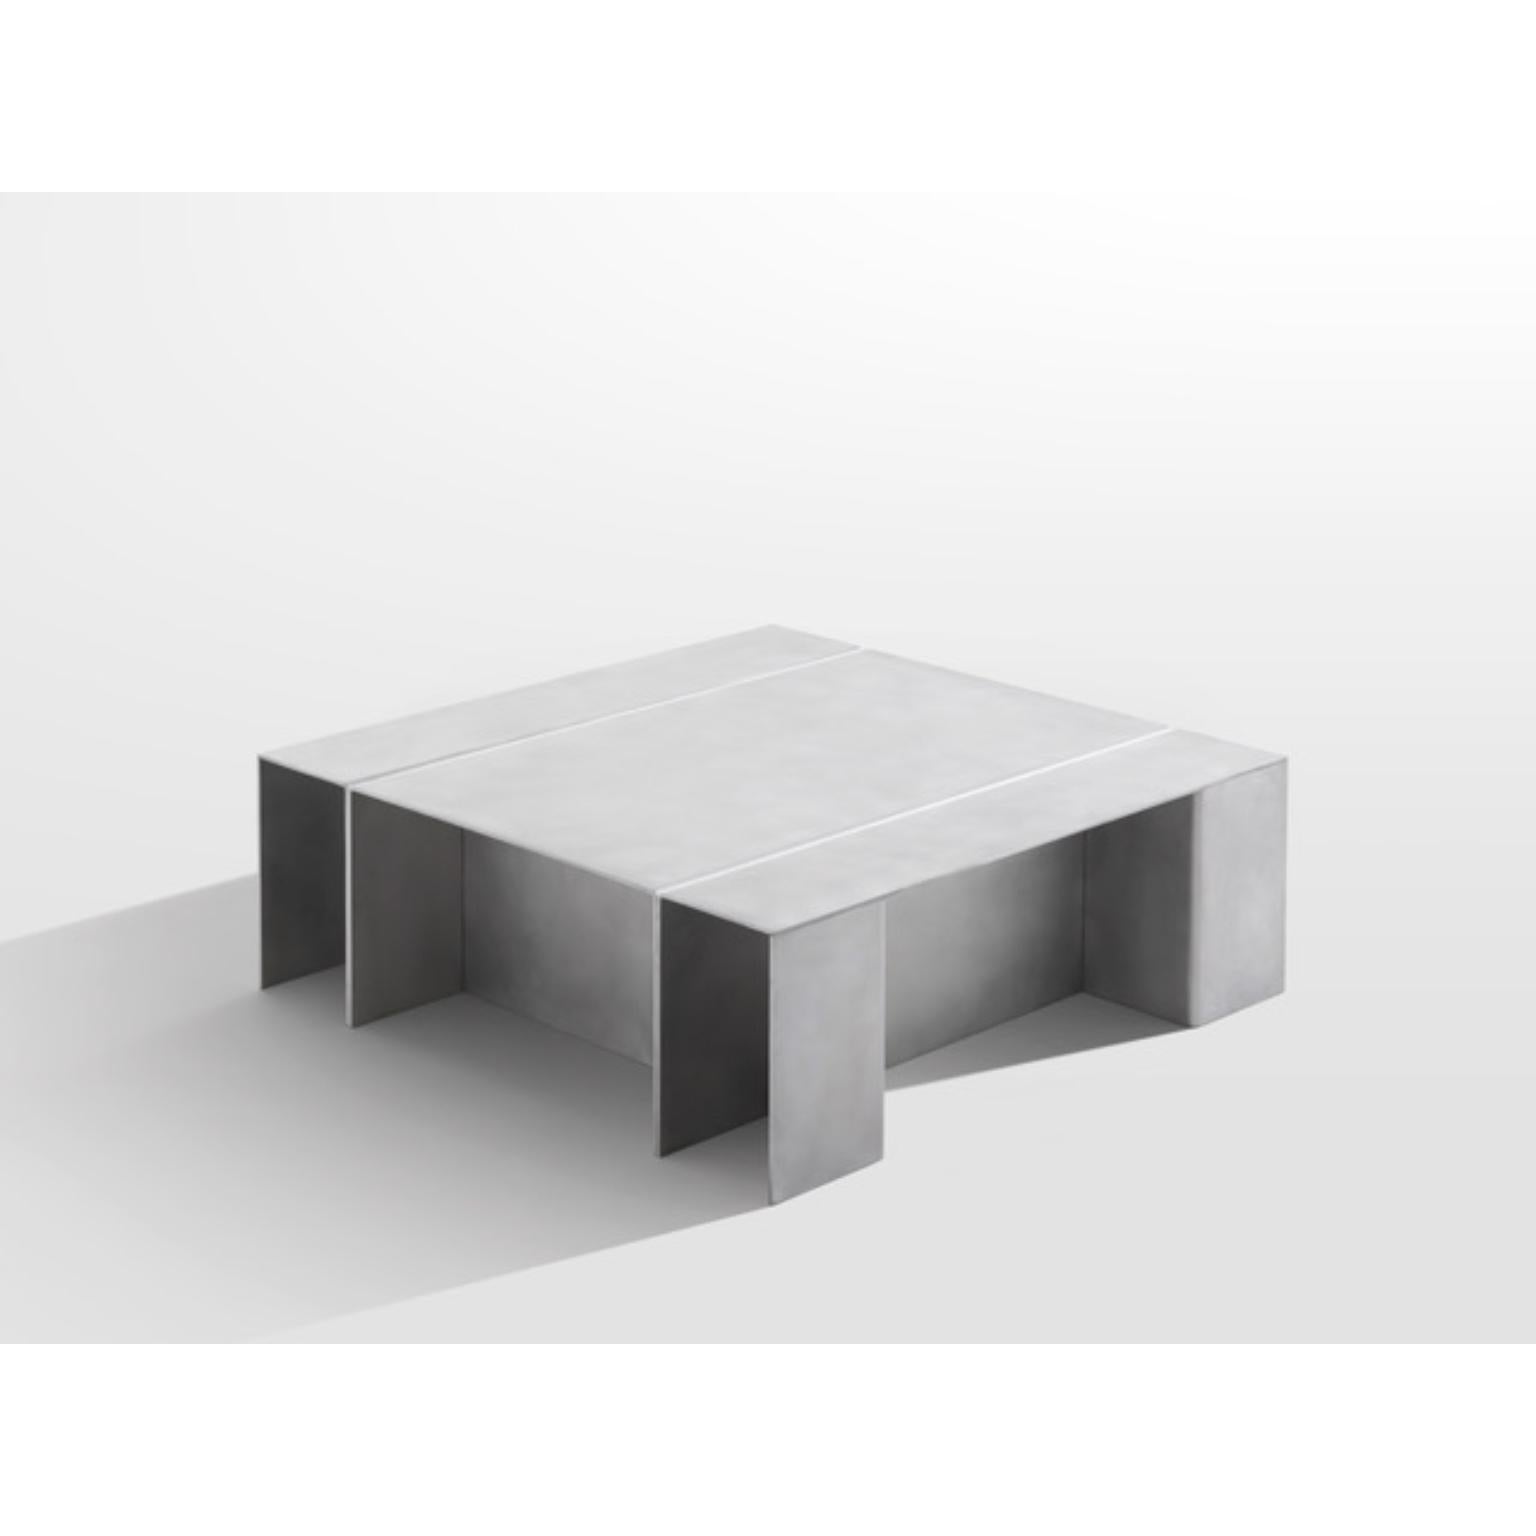 Aluminum Coffee Table By Paul Coenen
Dimensions: D 100 x W 100 x H 35 cm
Materials: Aluminum.

Paul Coenen employs an intuitive and hands-on approach, where he explores his fascination for materials and both modern and traditional manufacturing